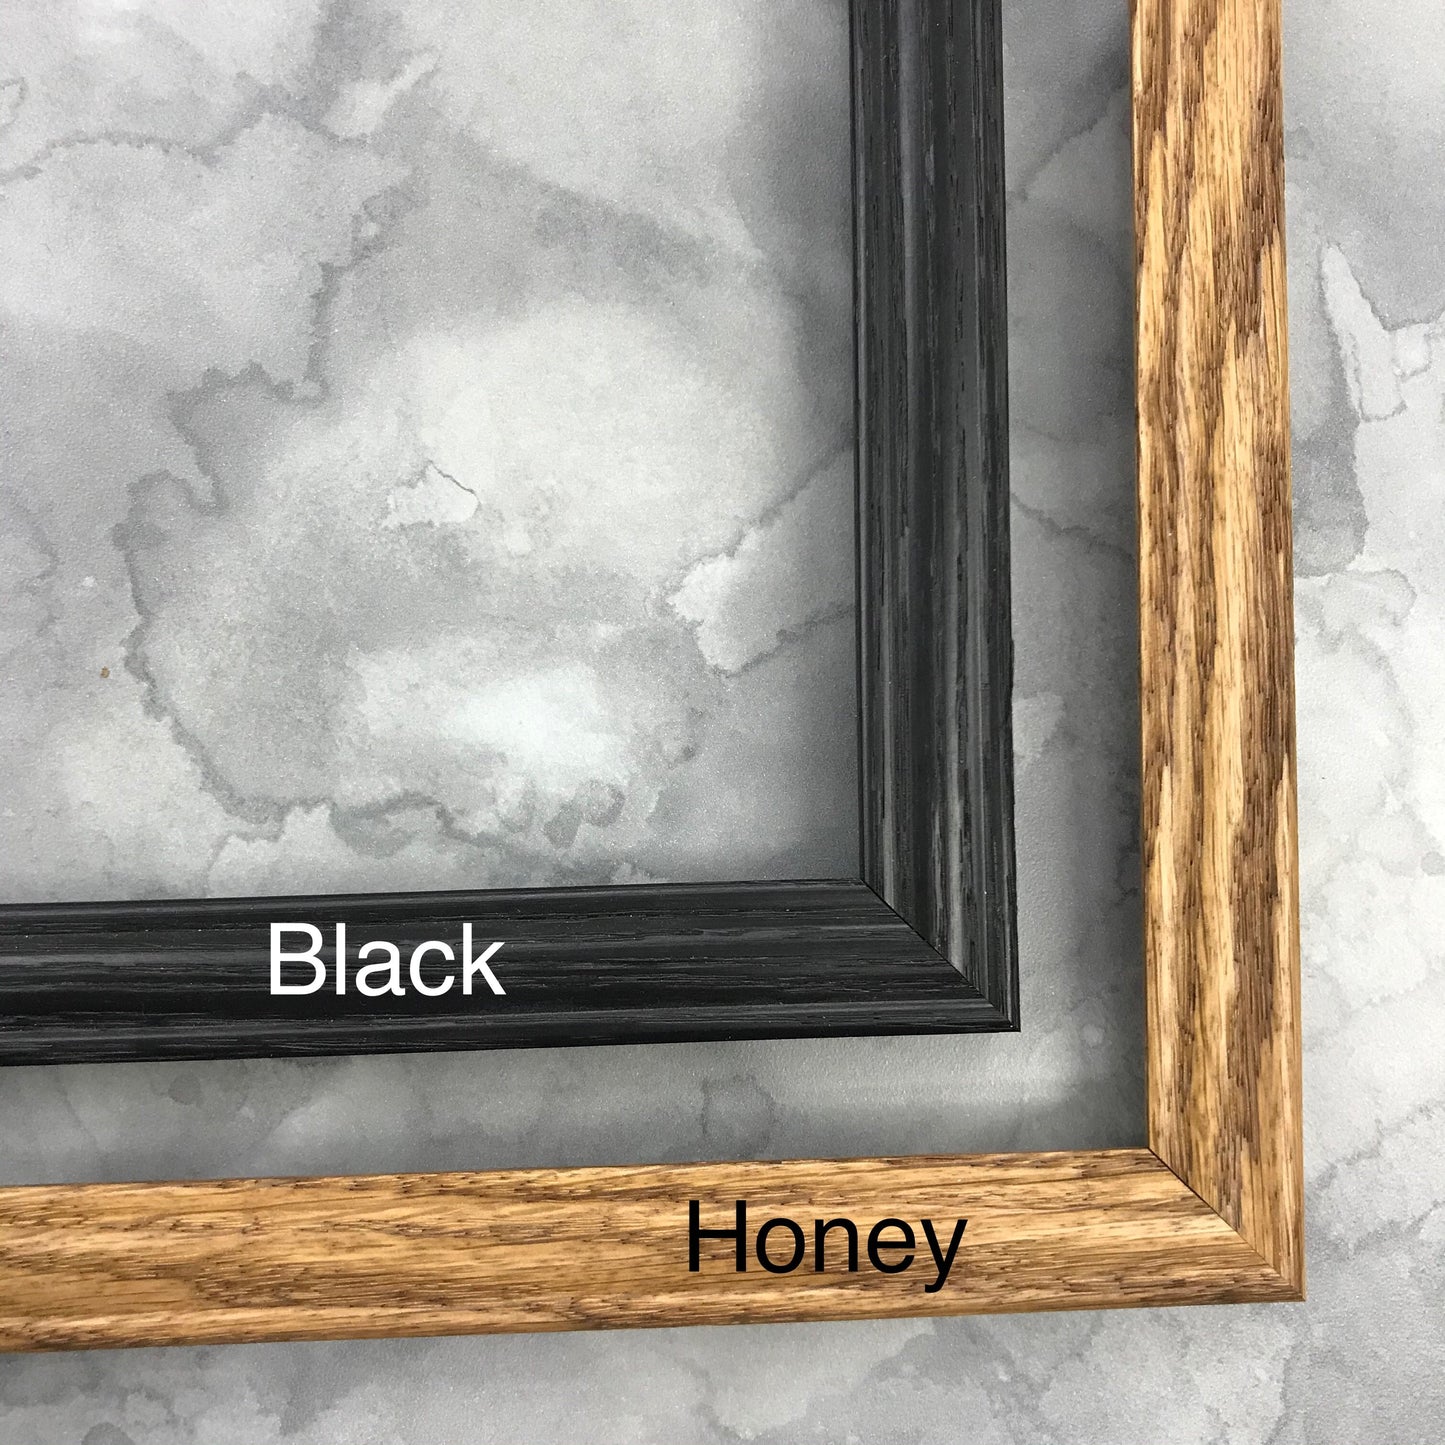 Hockey Picture Frame